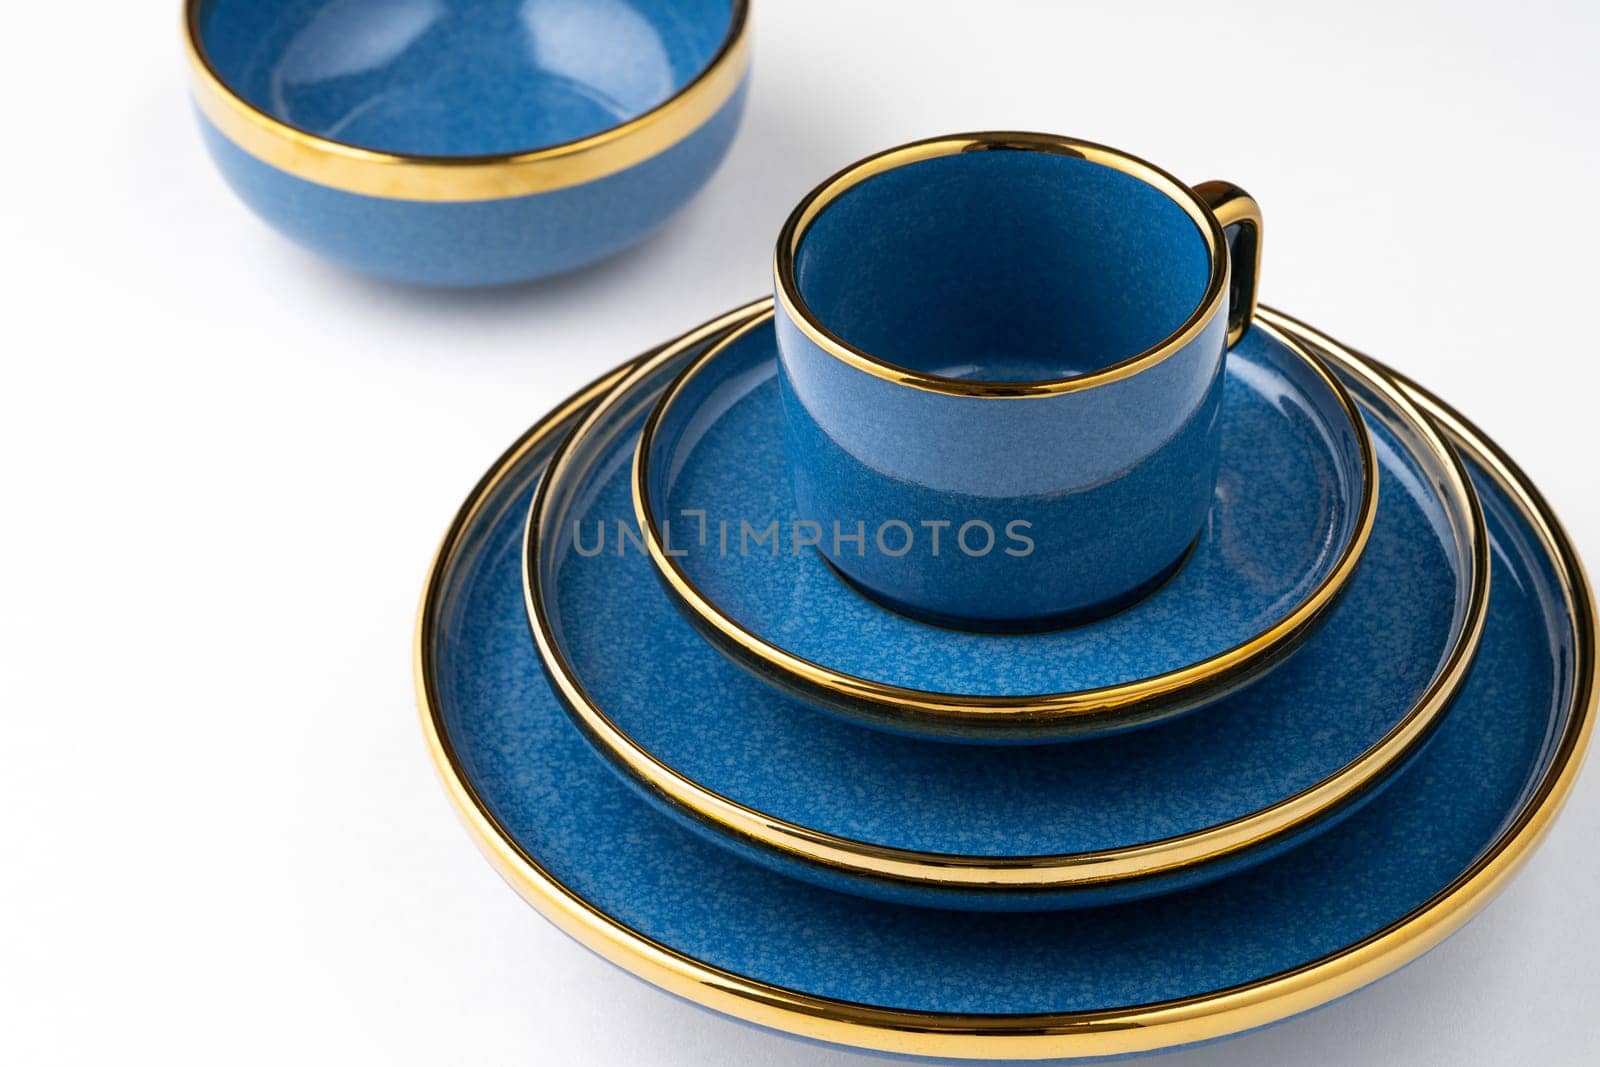 A set of blue ceramic plates and cup on a white background